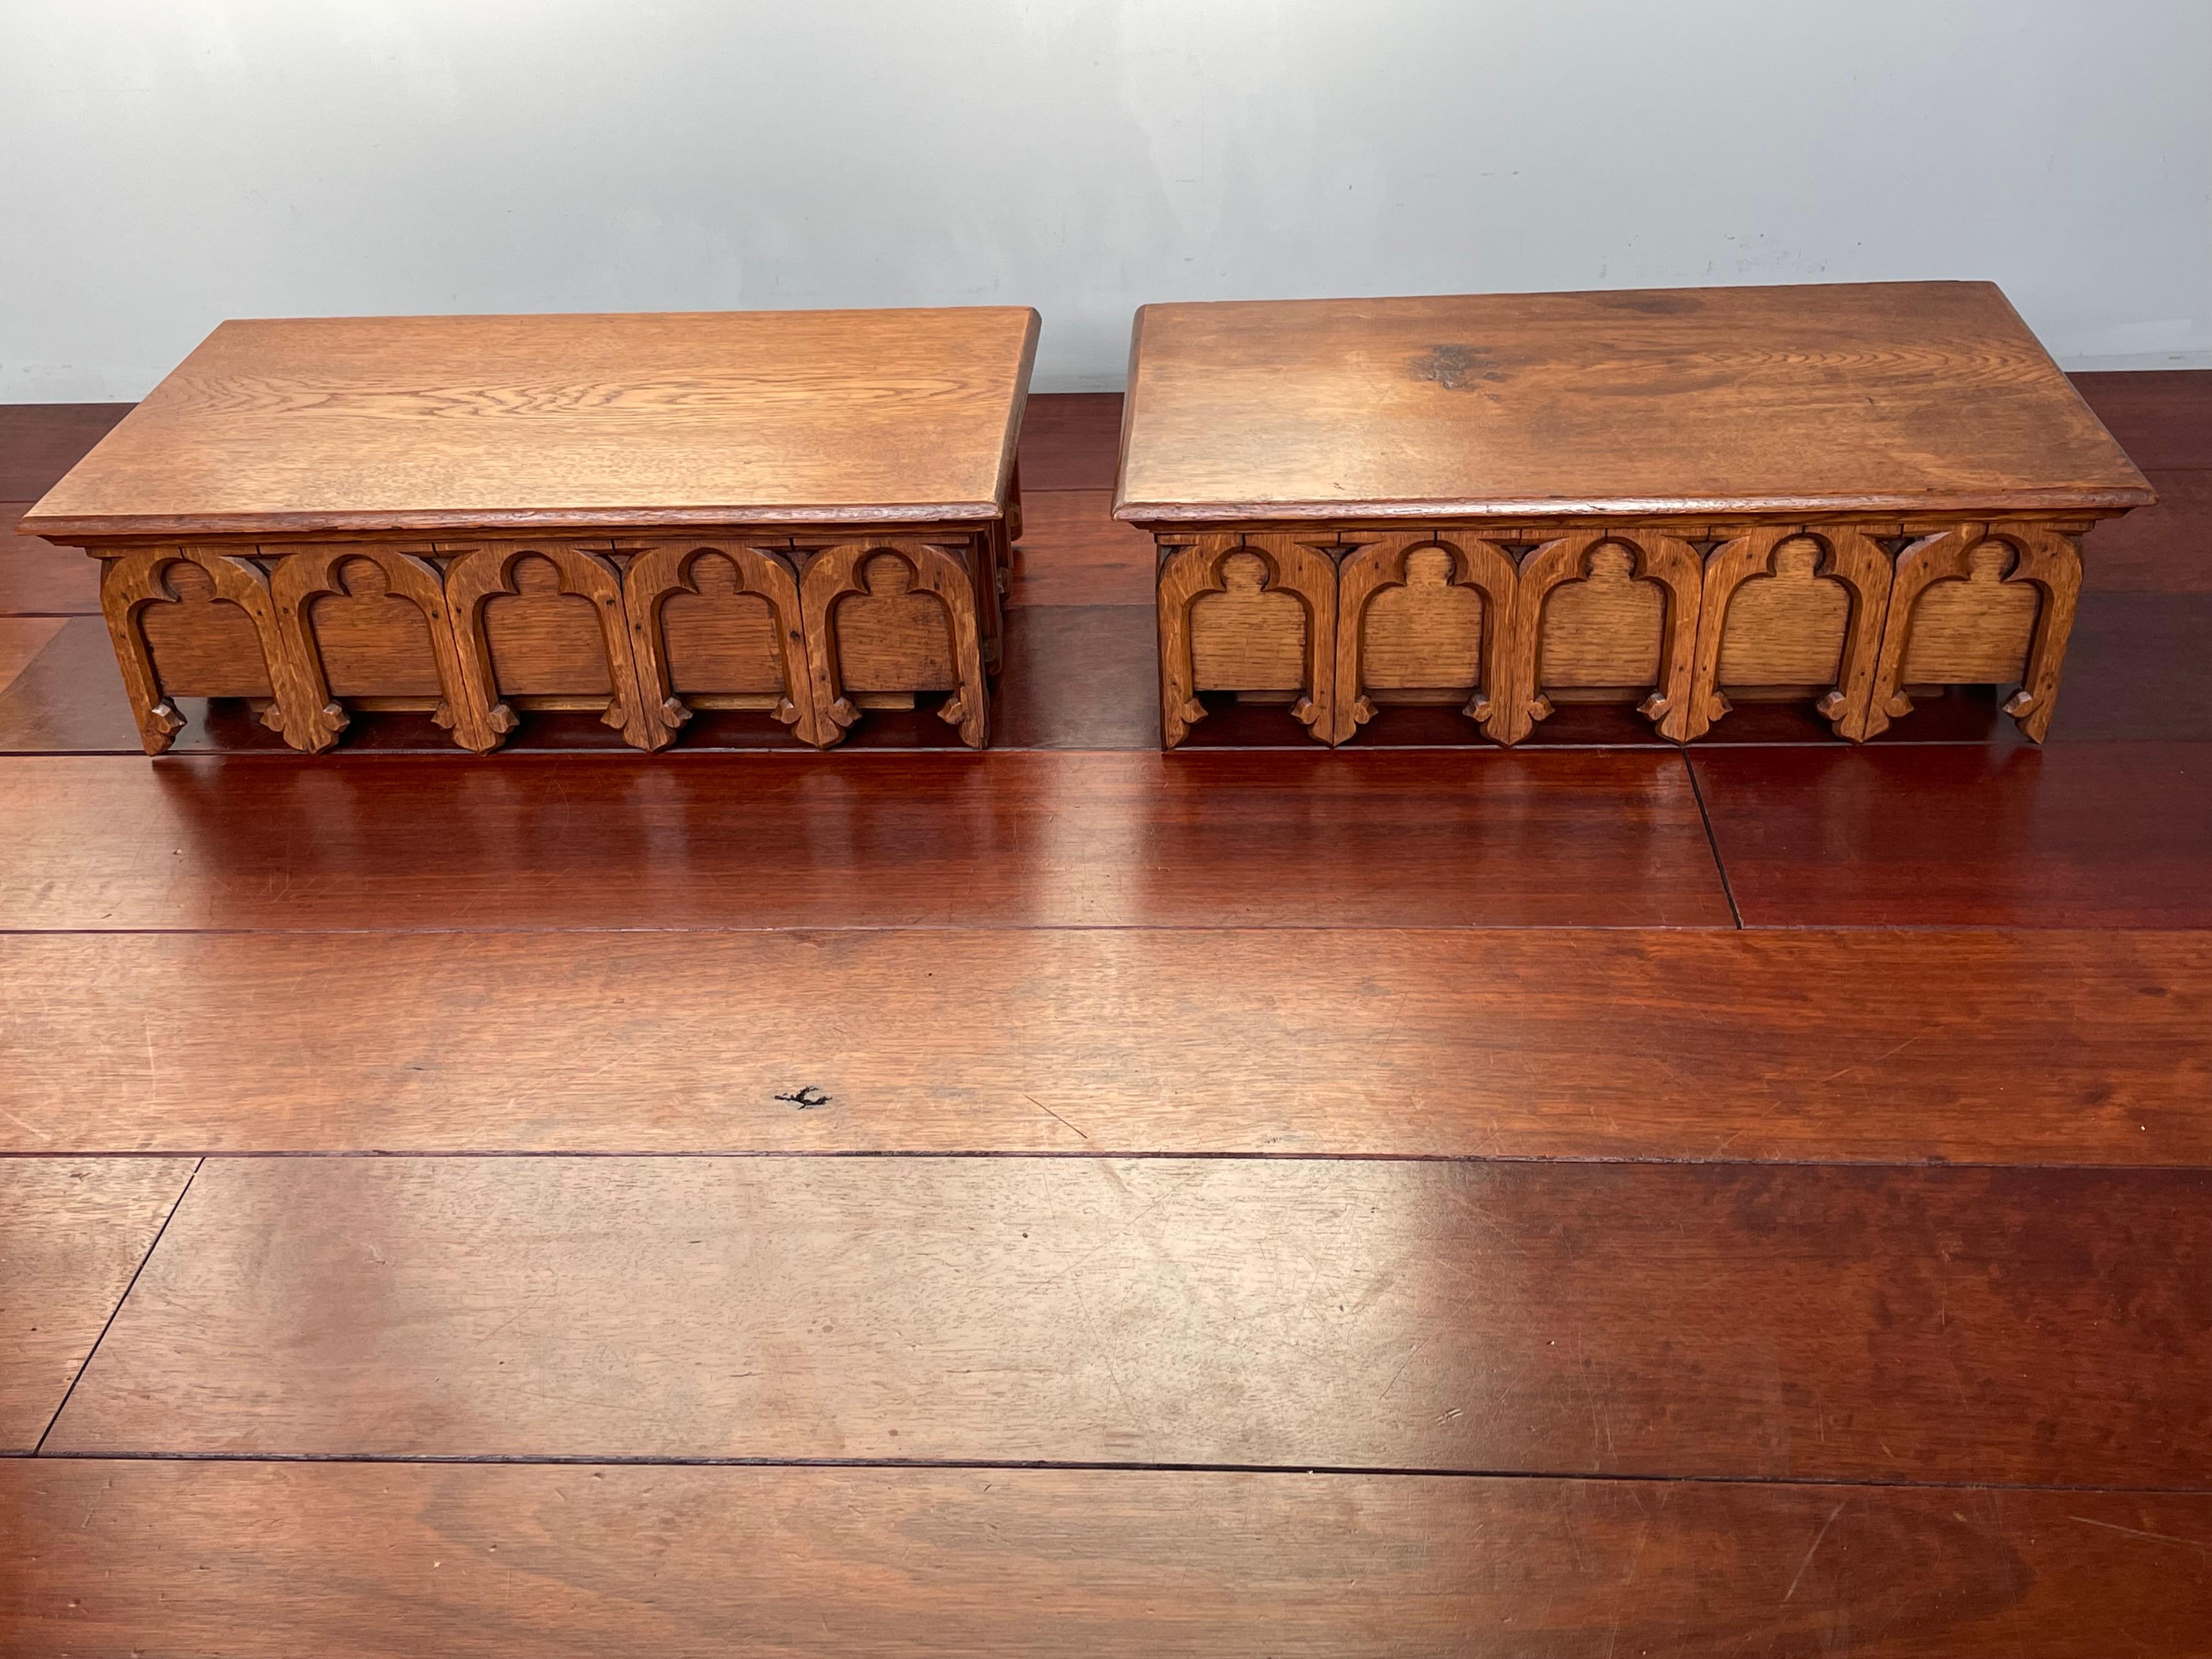 Matching and large pair of Gothic church wall brackets / display shelfs.

If you are a private collector of Gothic antiques or if you are looking for the perfect pair of Gothic Revival wall brackets for your church or monastery then this stunning